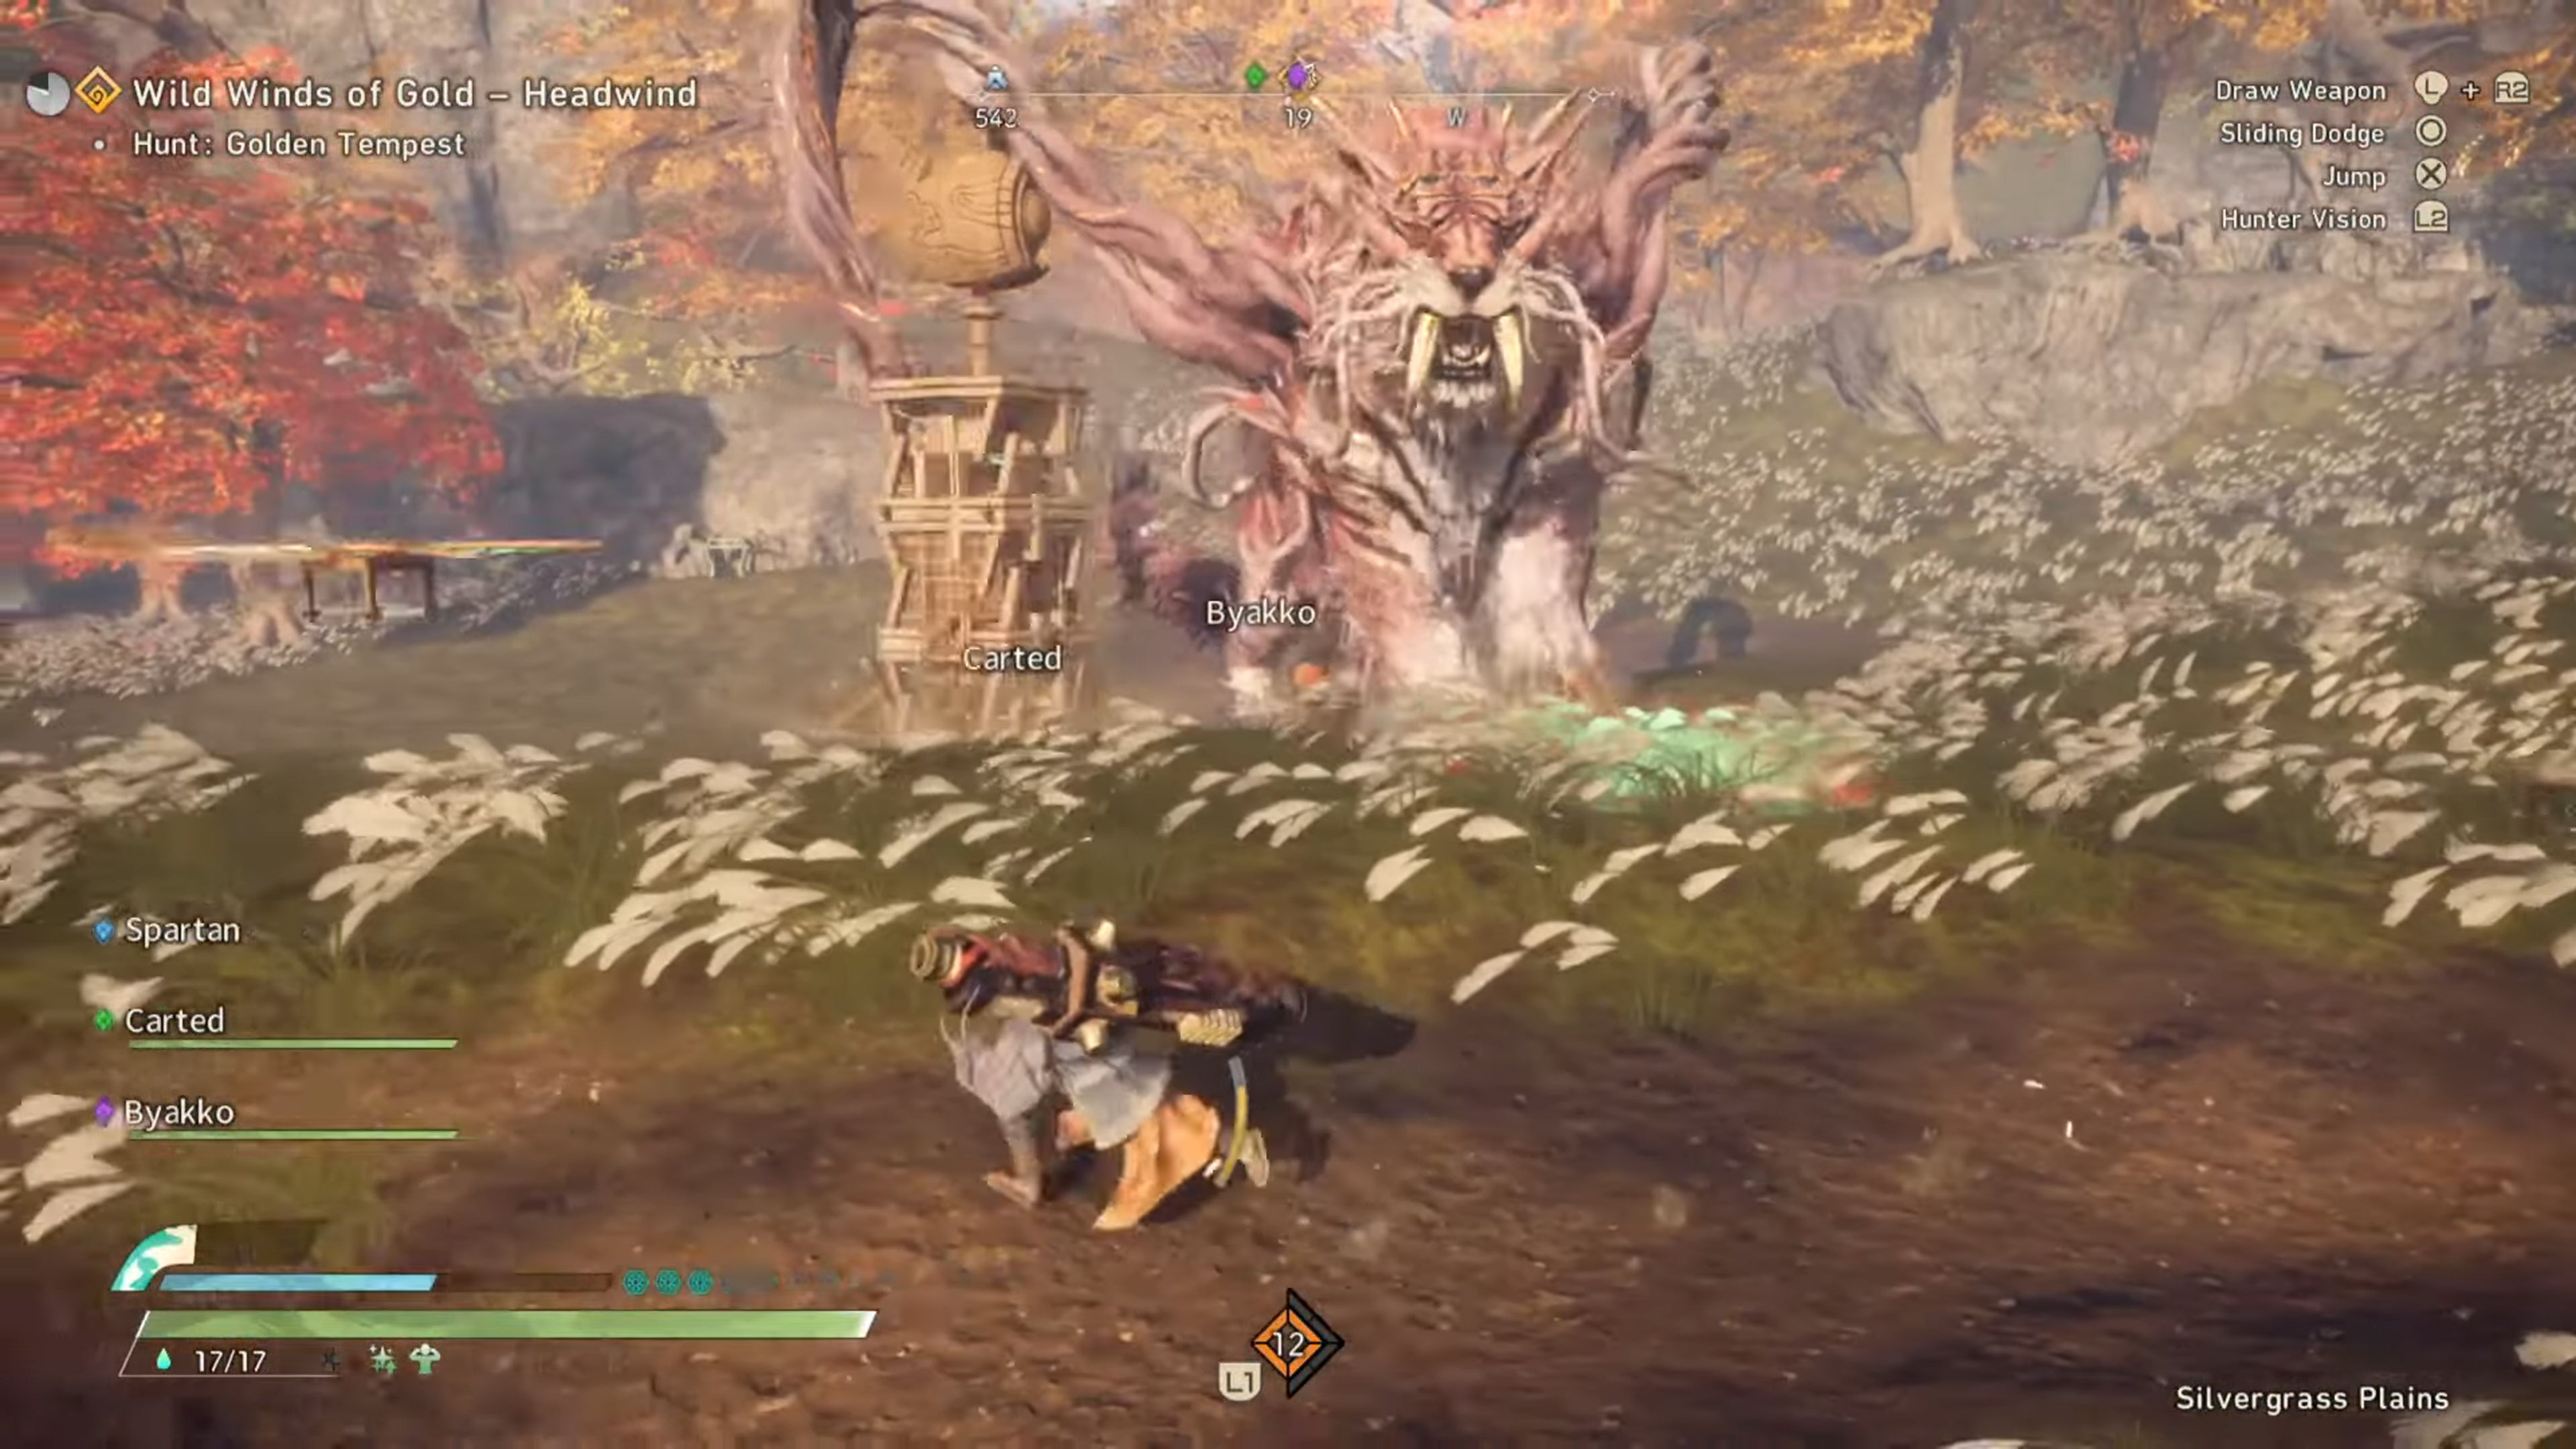 WILD HEARTS gets new gameplay showcasing the ferocious Golden